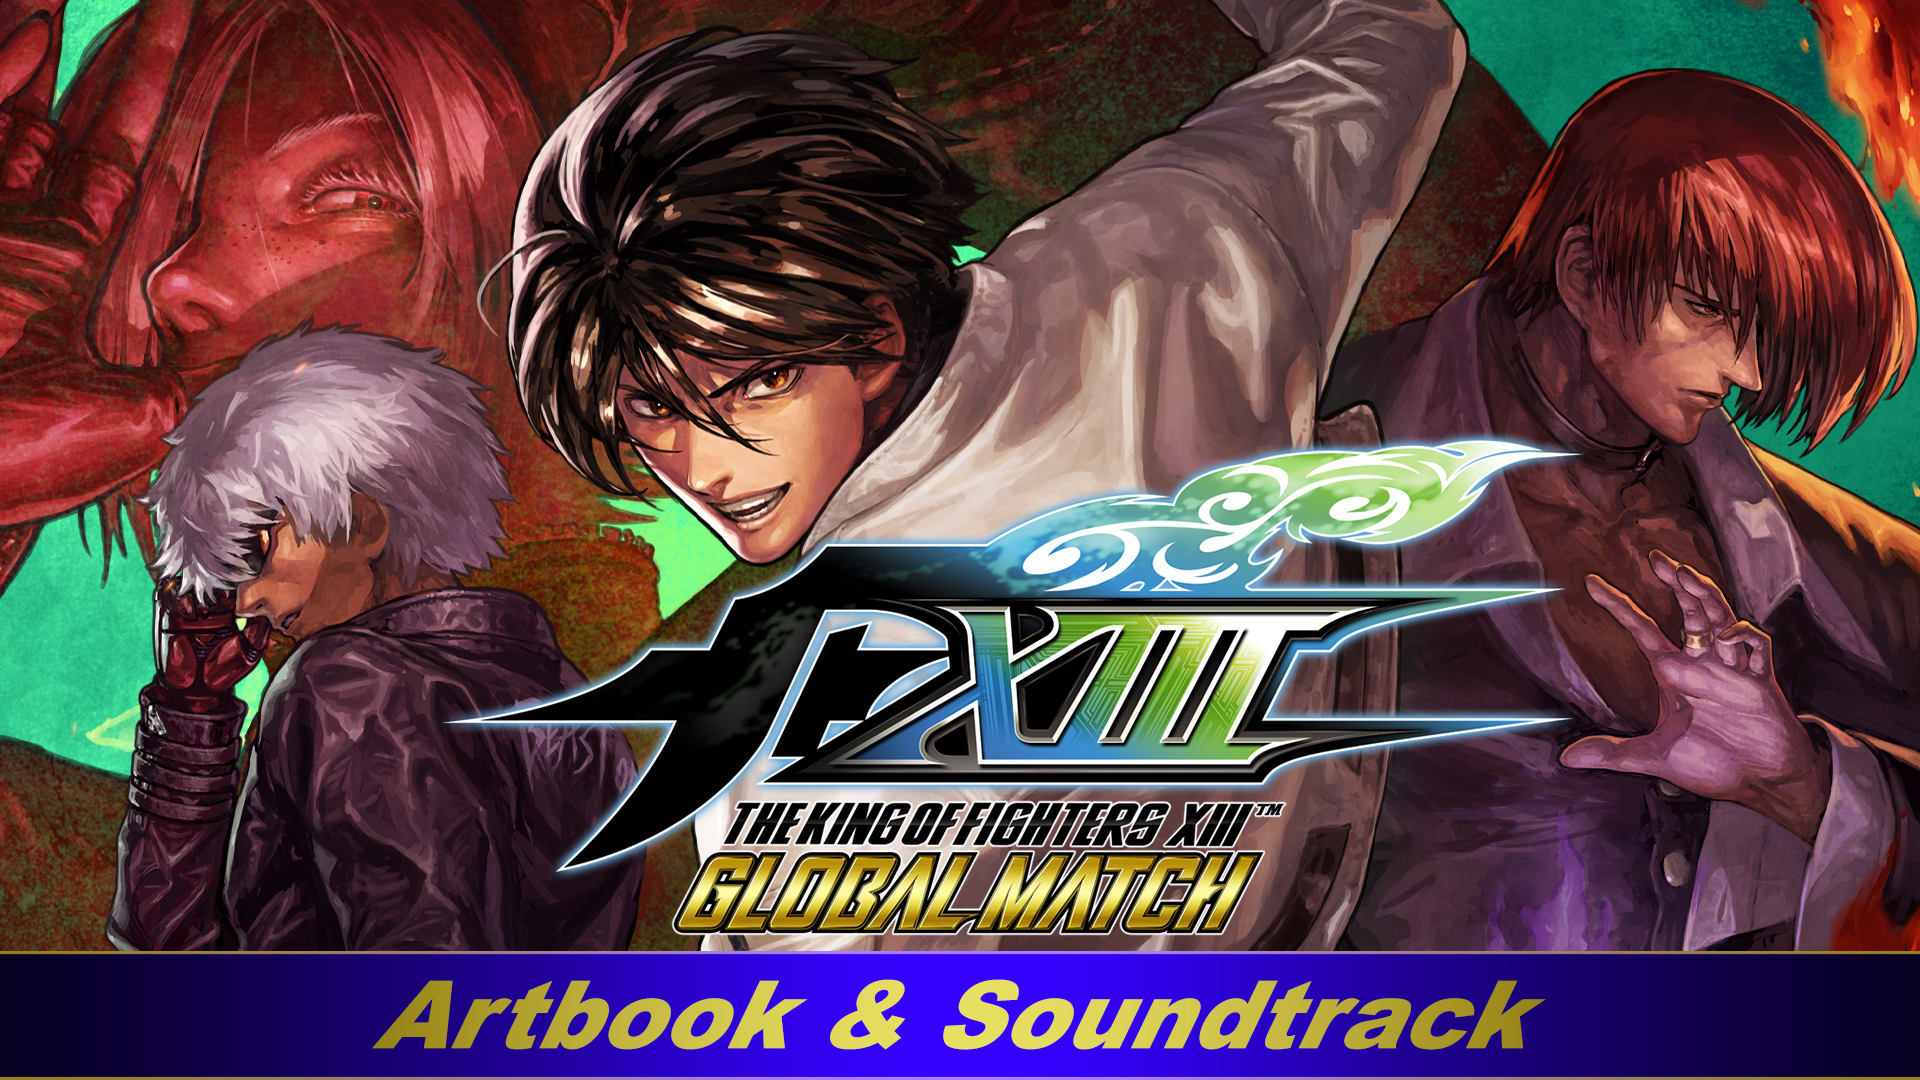 The King of Fighters XIII Dungeons & Dragons The King of Fighters